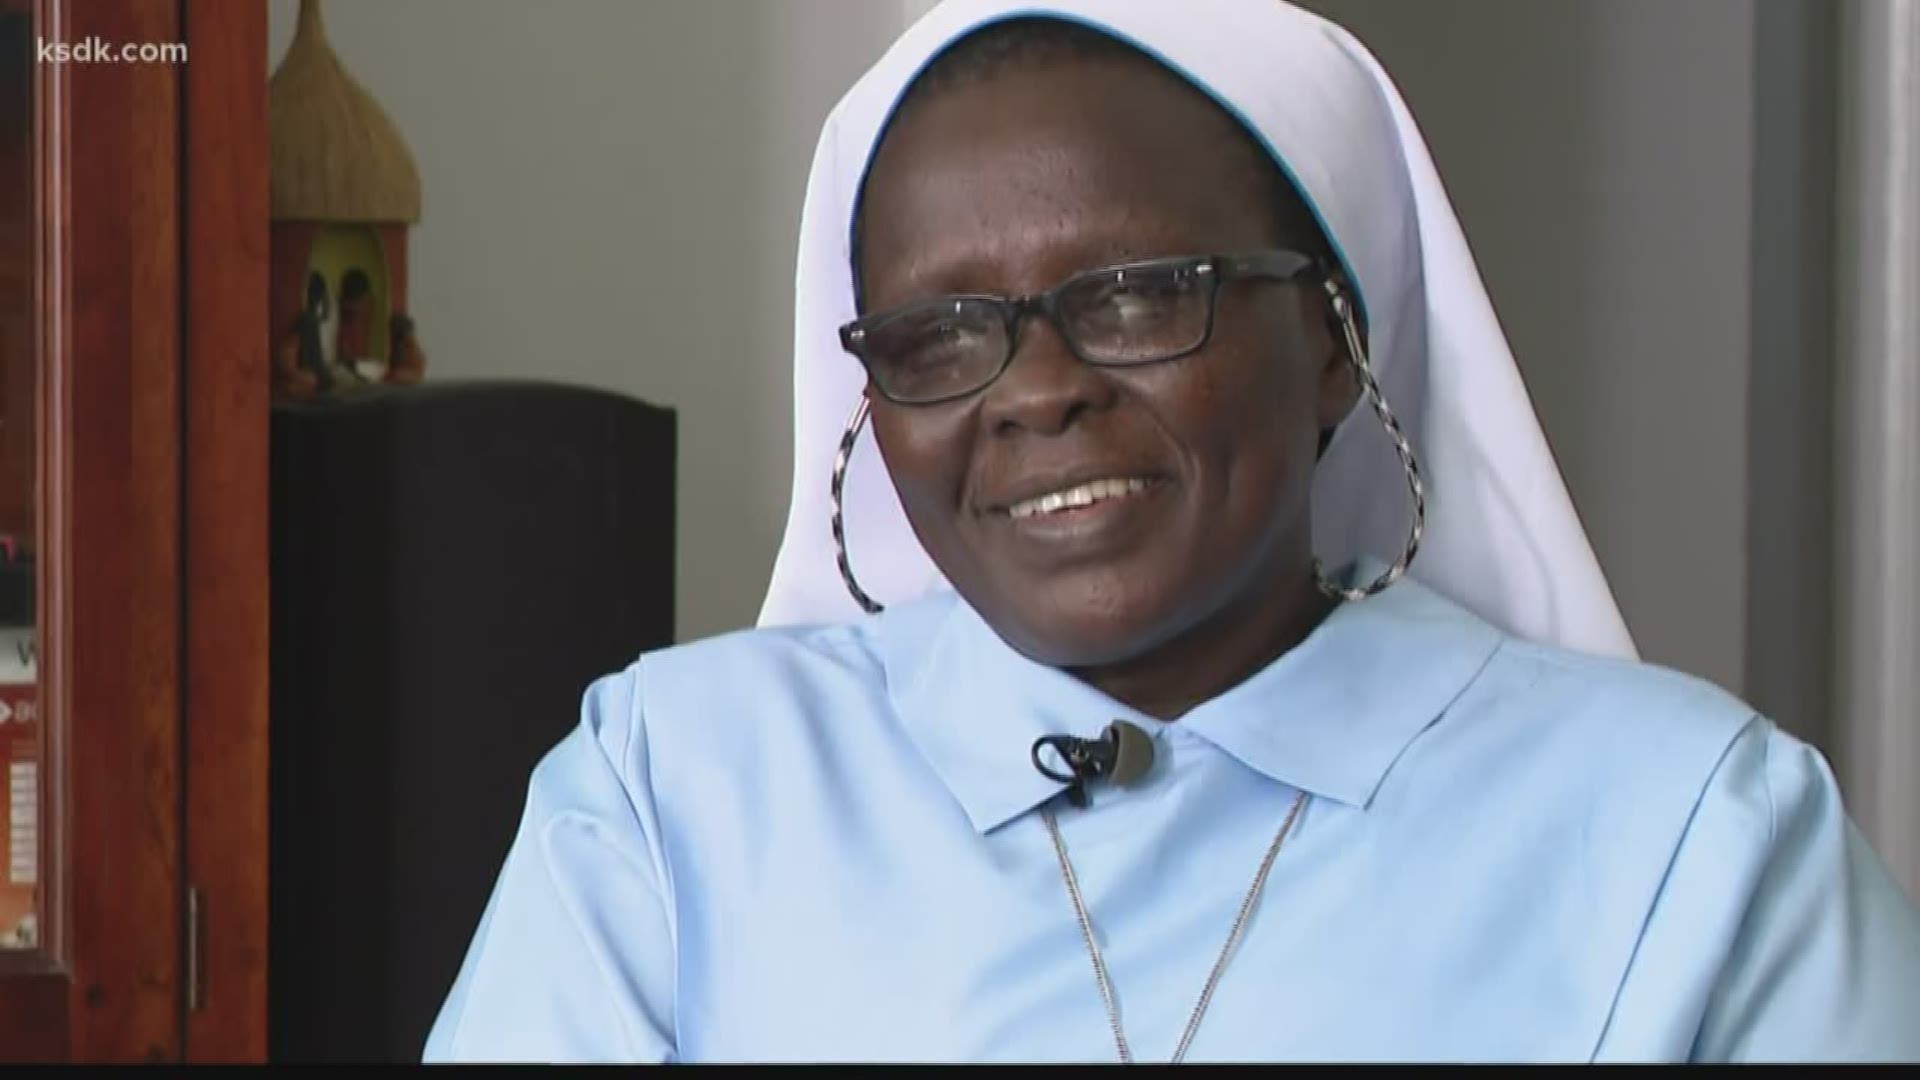 A hernia was slowing down Sister Susan Clare Ndeezo from helping the children back in her home country. Some St. Louisans stepped in to help